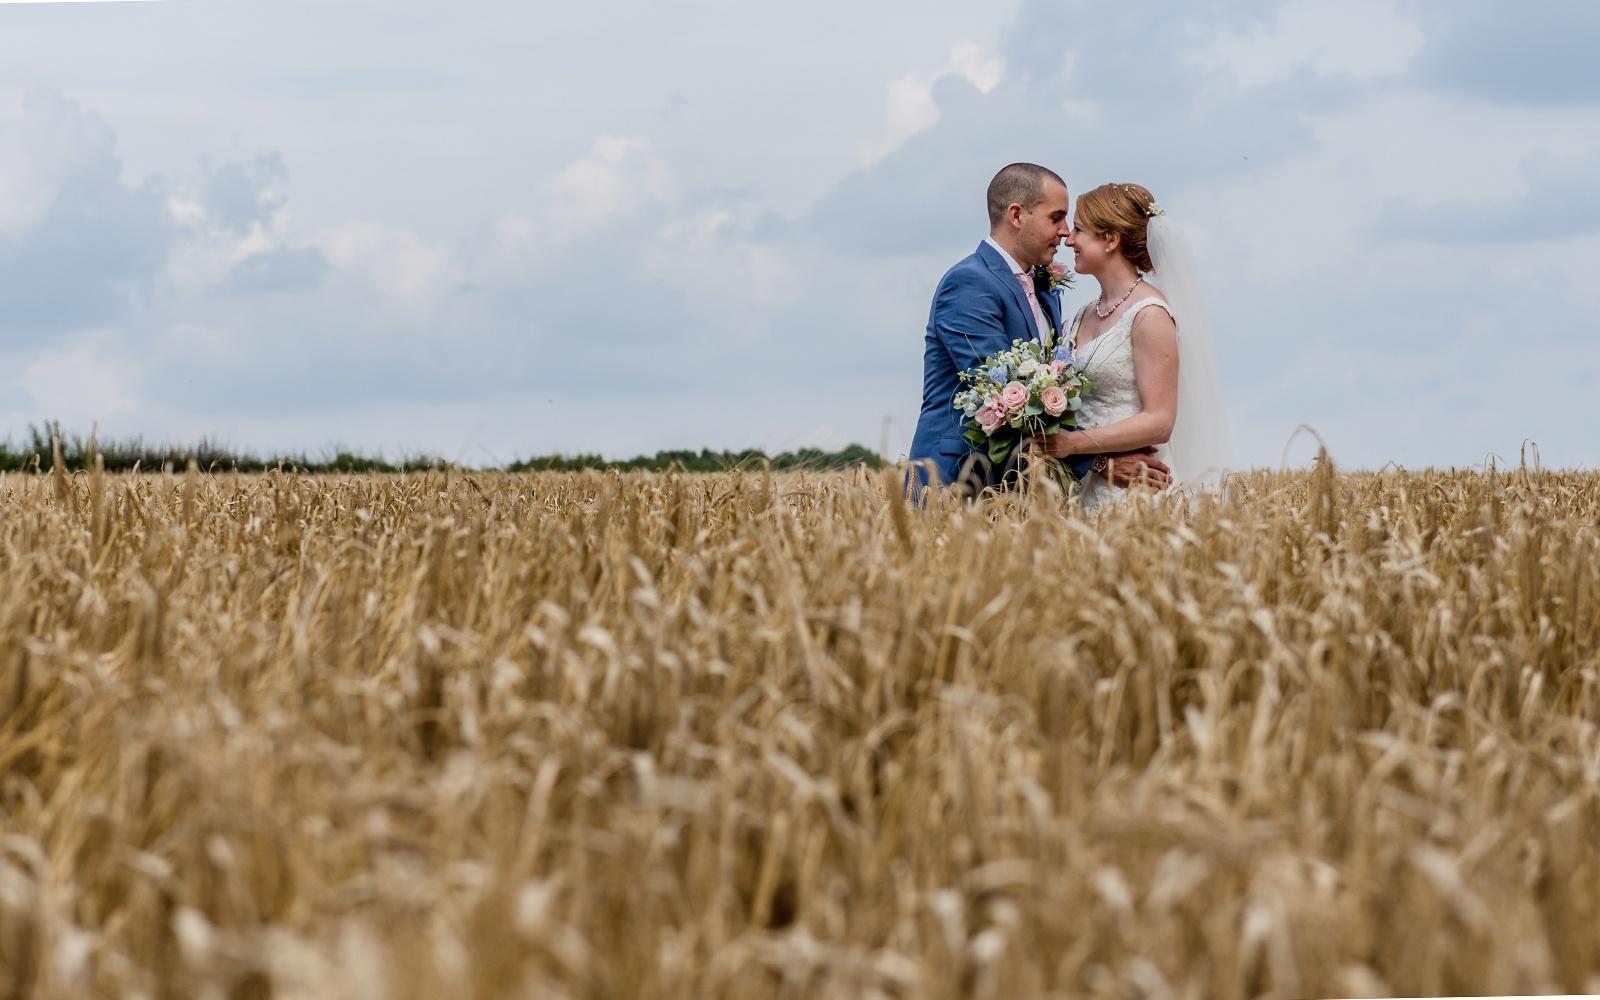 Capture Every Moment Cirencester based photography duo photographers Bittenham Springs wedding venue cornfield just married